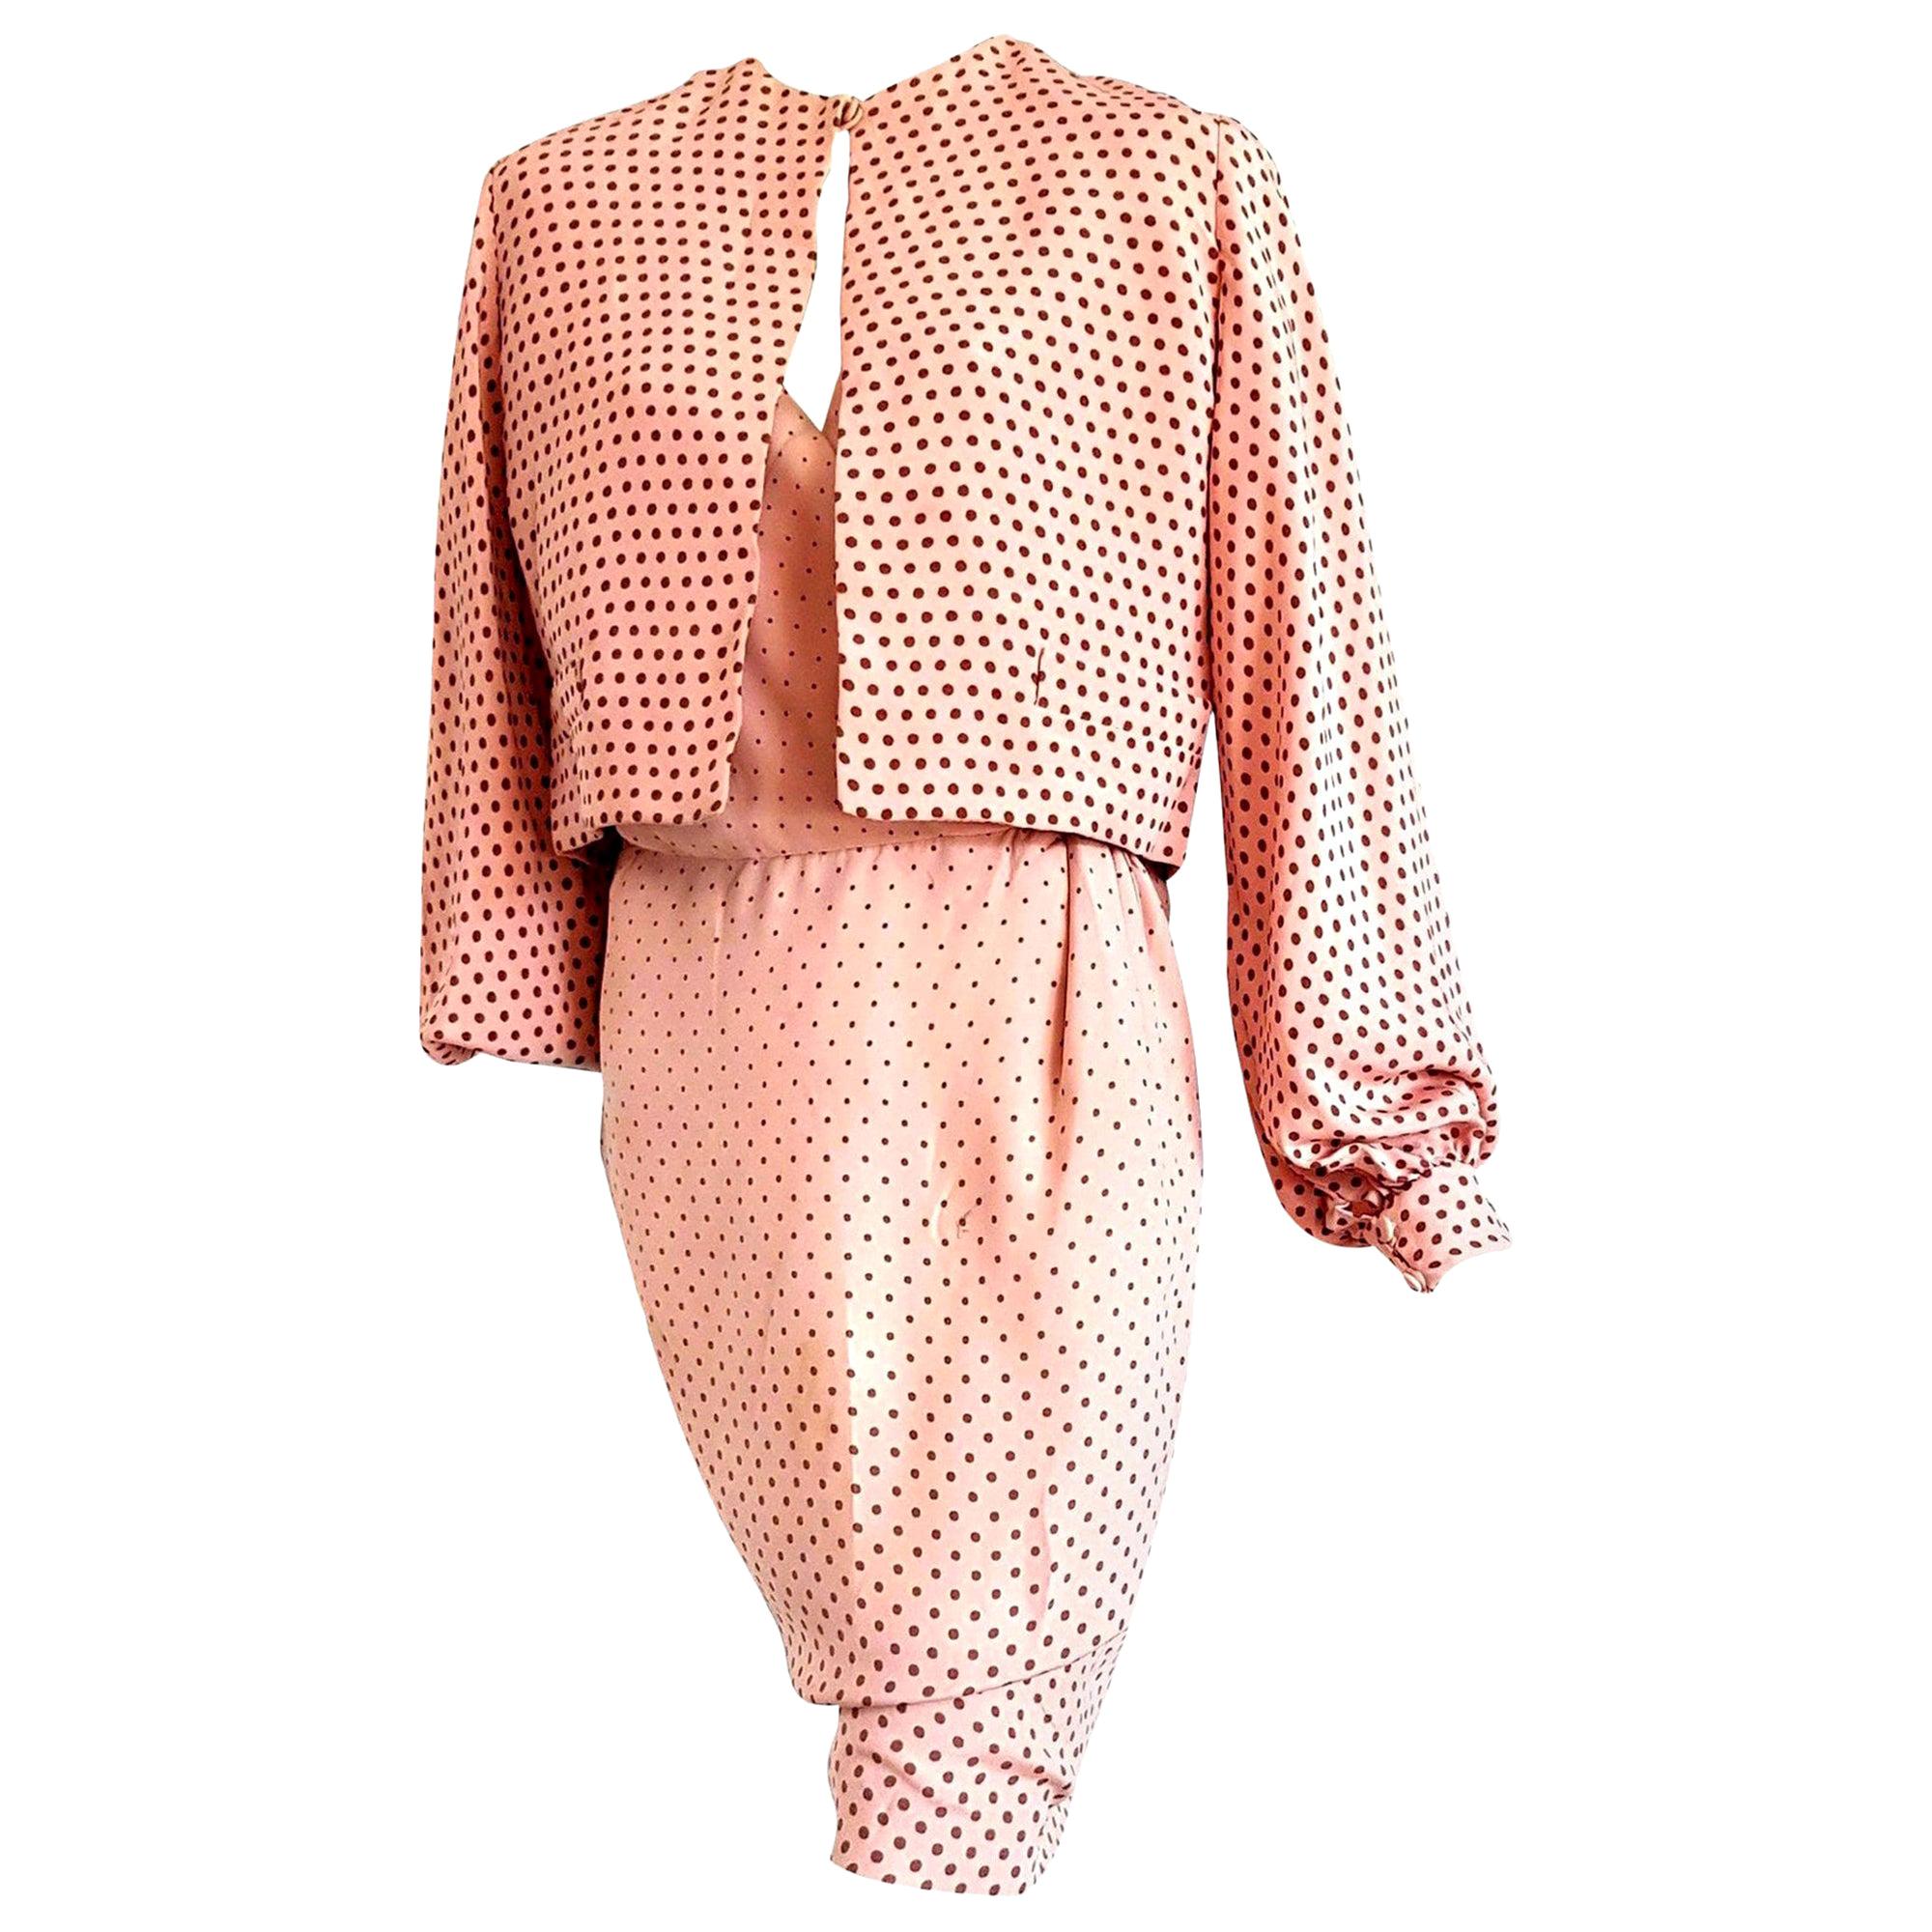 VALENTINO "New" Haute Couture Pink with Brown Polka Dots Silk Dress - Unworn For Sale